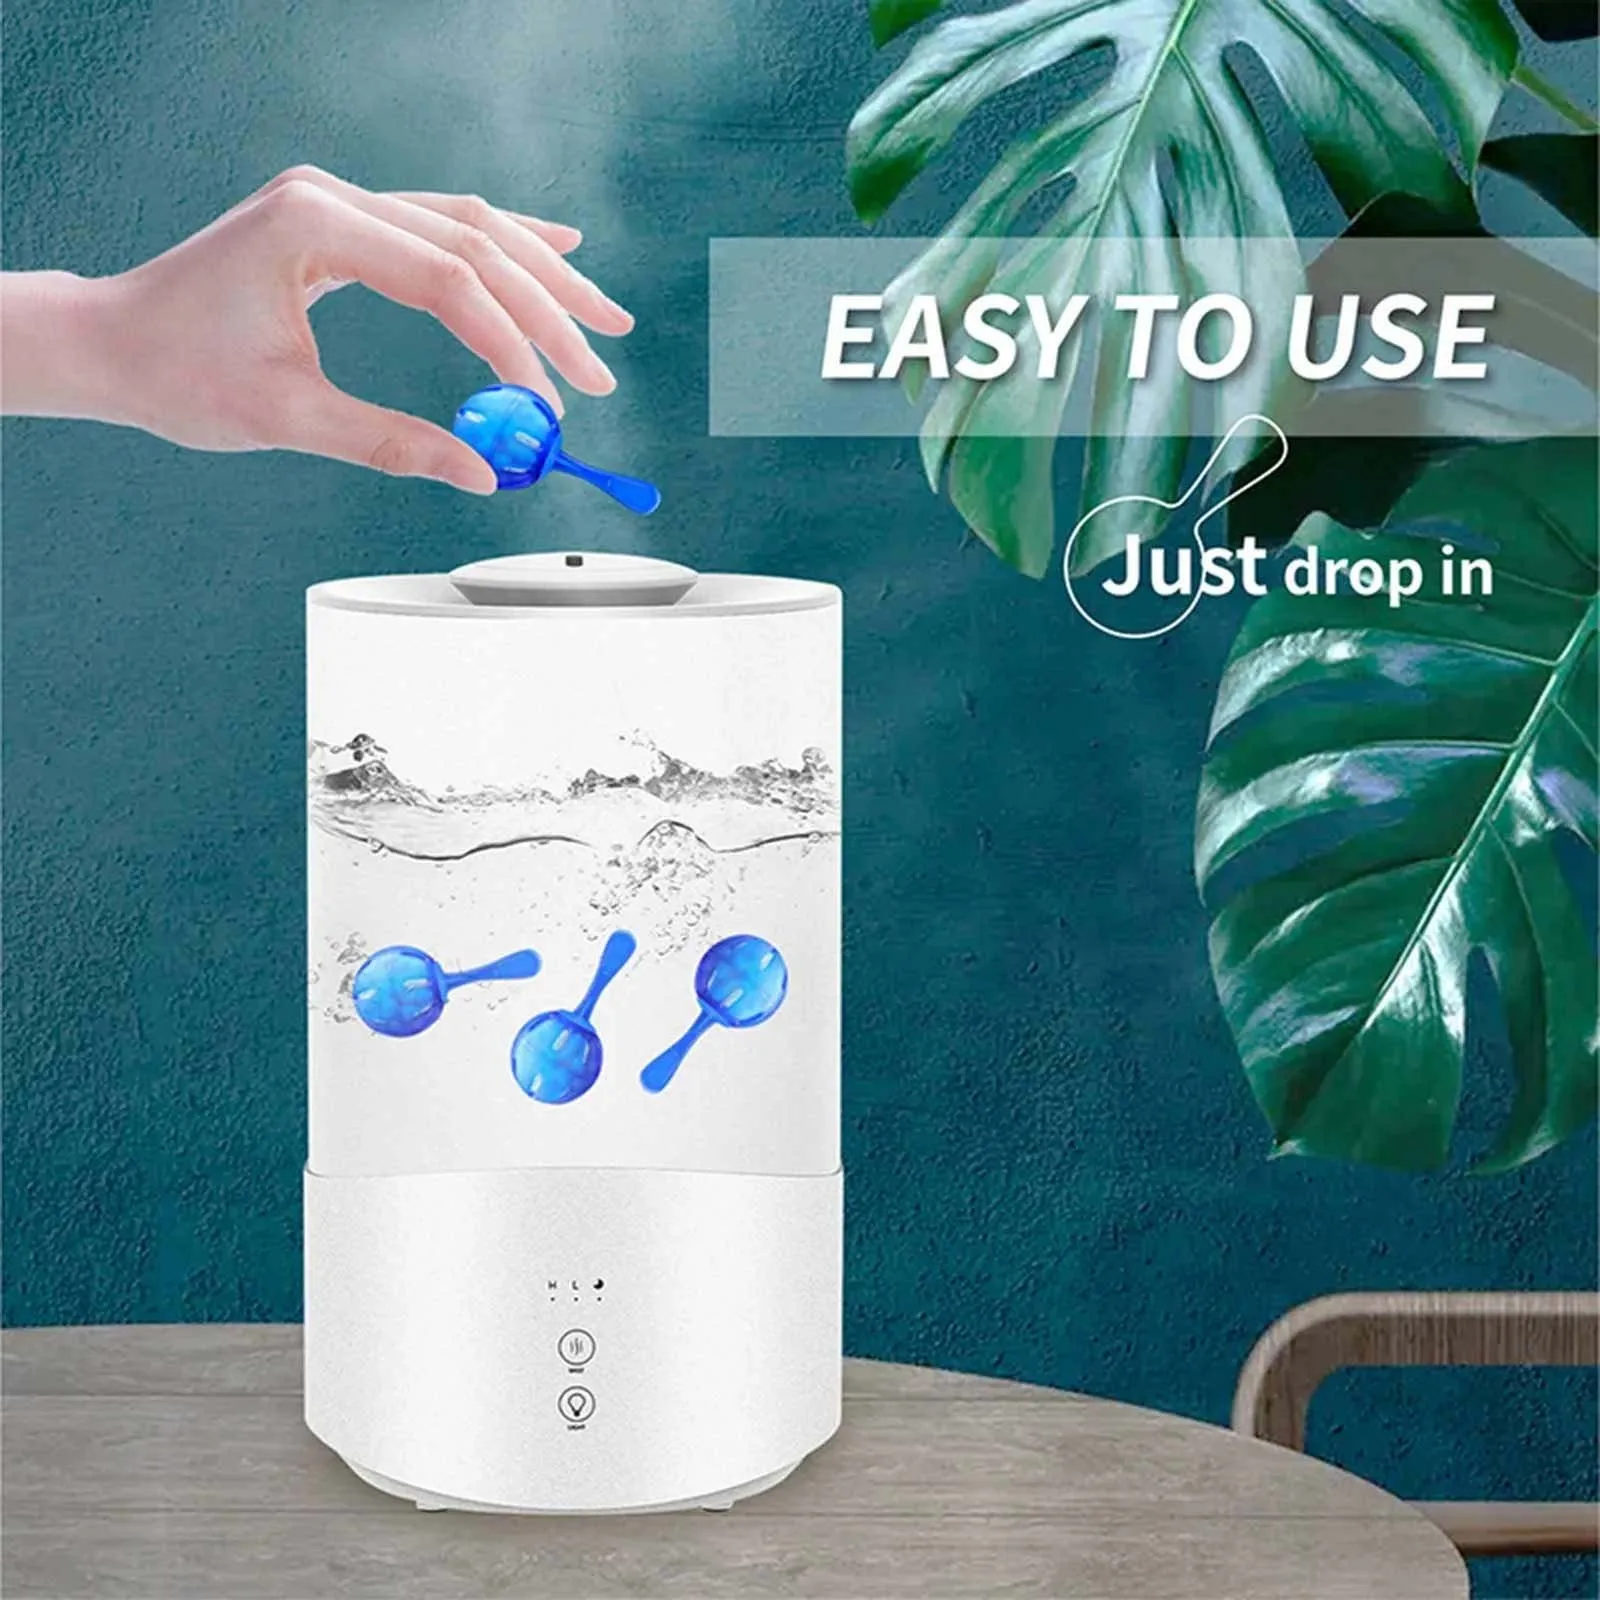 

10pcs Humidifier Cleaner Replacement Demineralization Cartridge For Humidifiers Steam White Dust Fish Tank Cleaning Tools